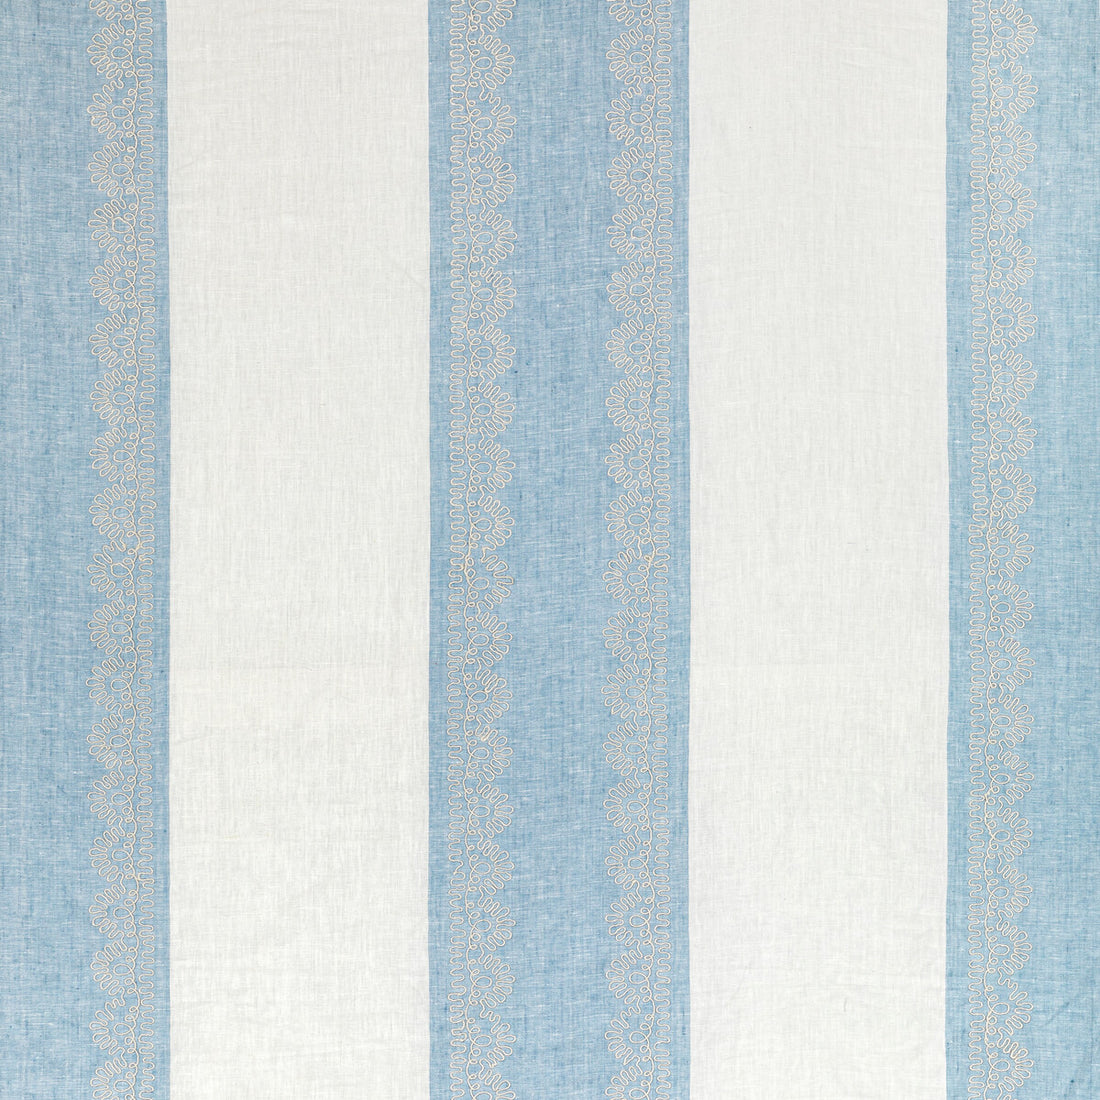 Banner Sheer fabric in denim color - pattern 2021123.5.0 - by Lee Jofa in the Summerland collection